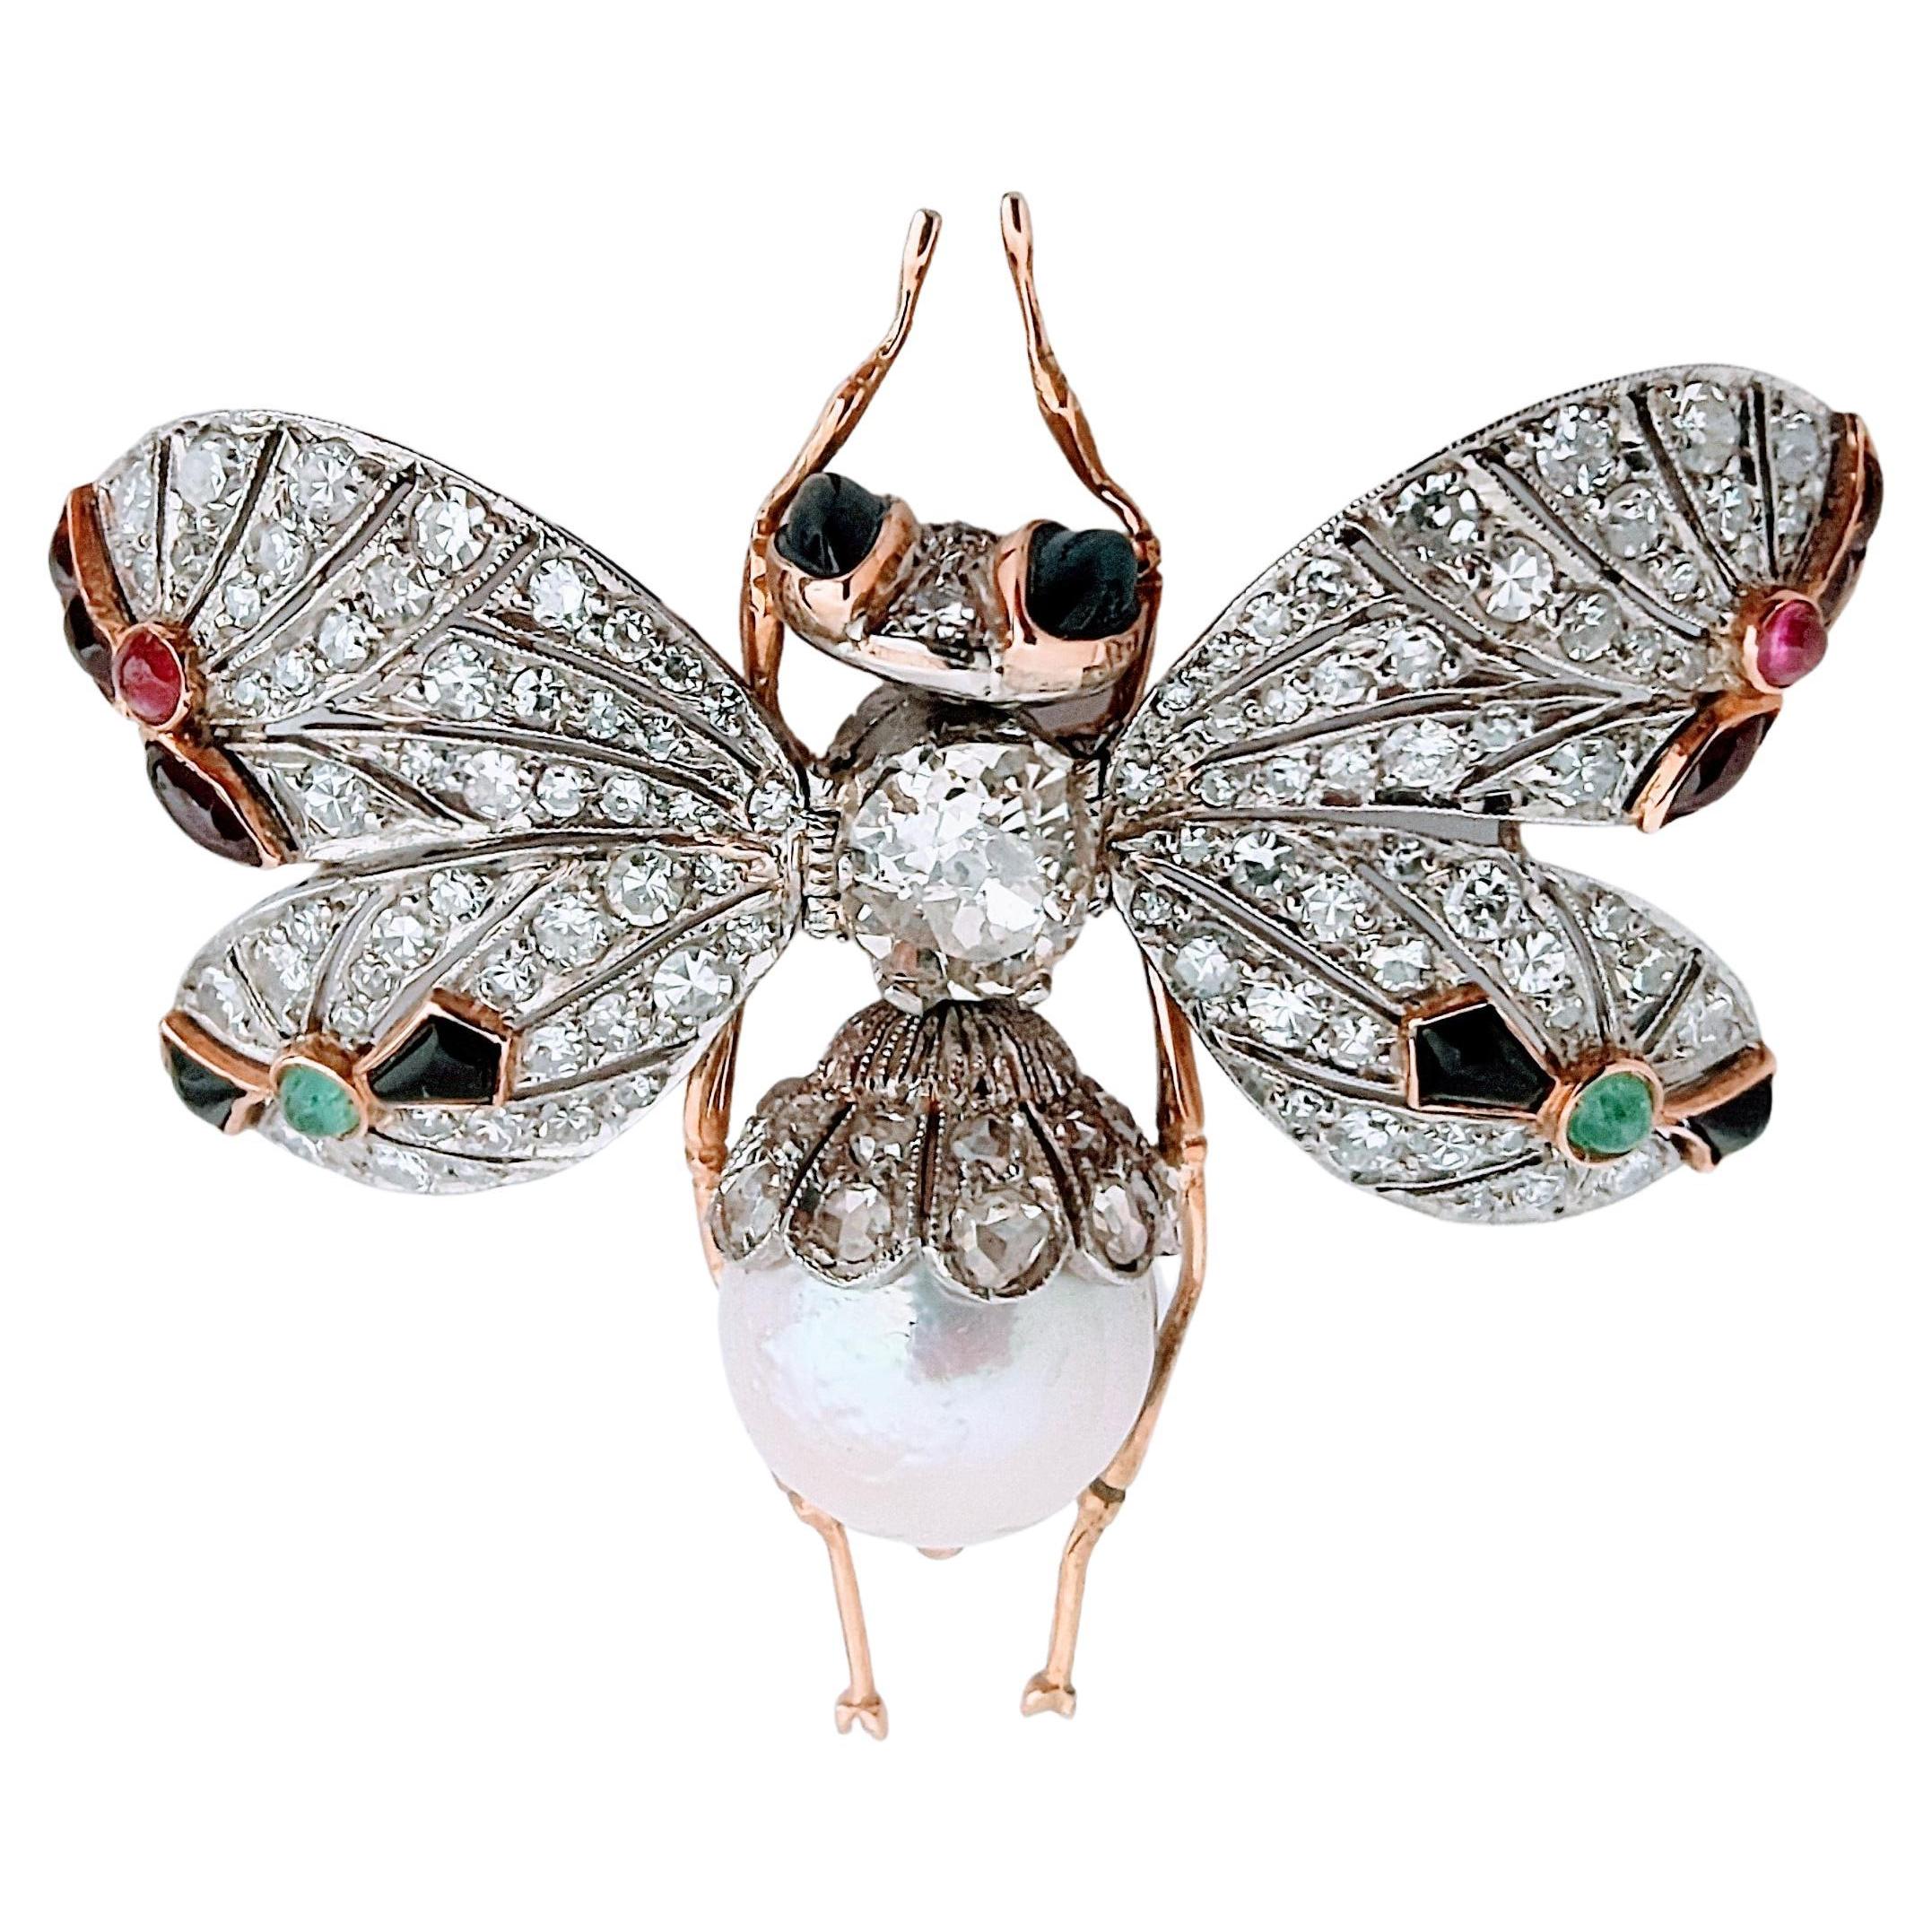 Beautiful butterfly with movement made of platinum and detail in gold 18 Karats, weight 23.29 grams. In the center set in illusion a beautiful Old Mine cut Diamond measures 8.30x 7.50x 5.60 millimeters and weight 2.02 carats, color K and clarity I1.